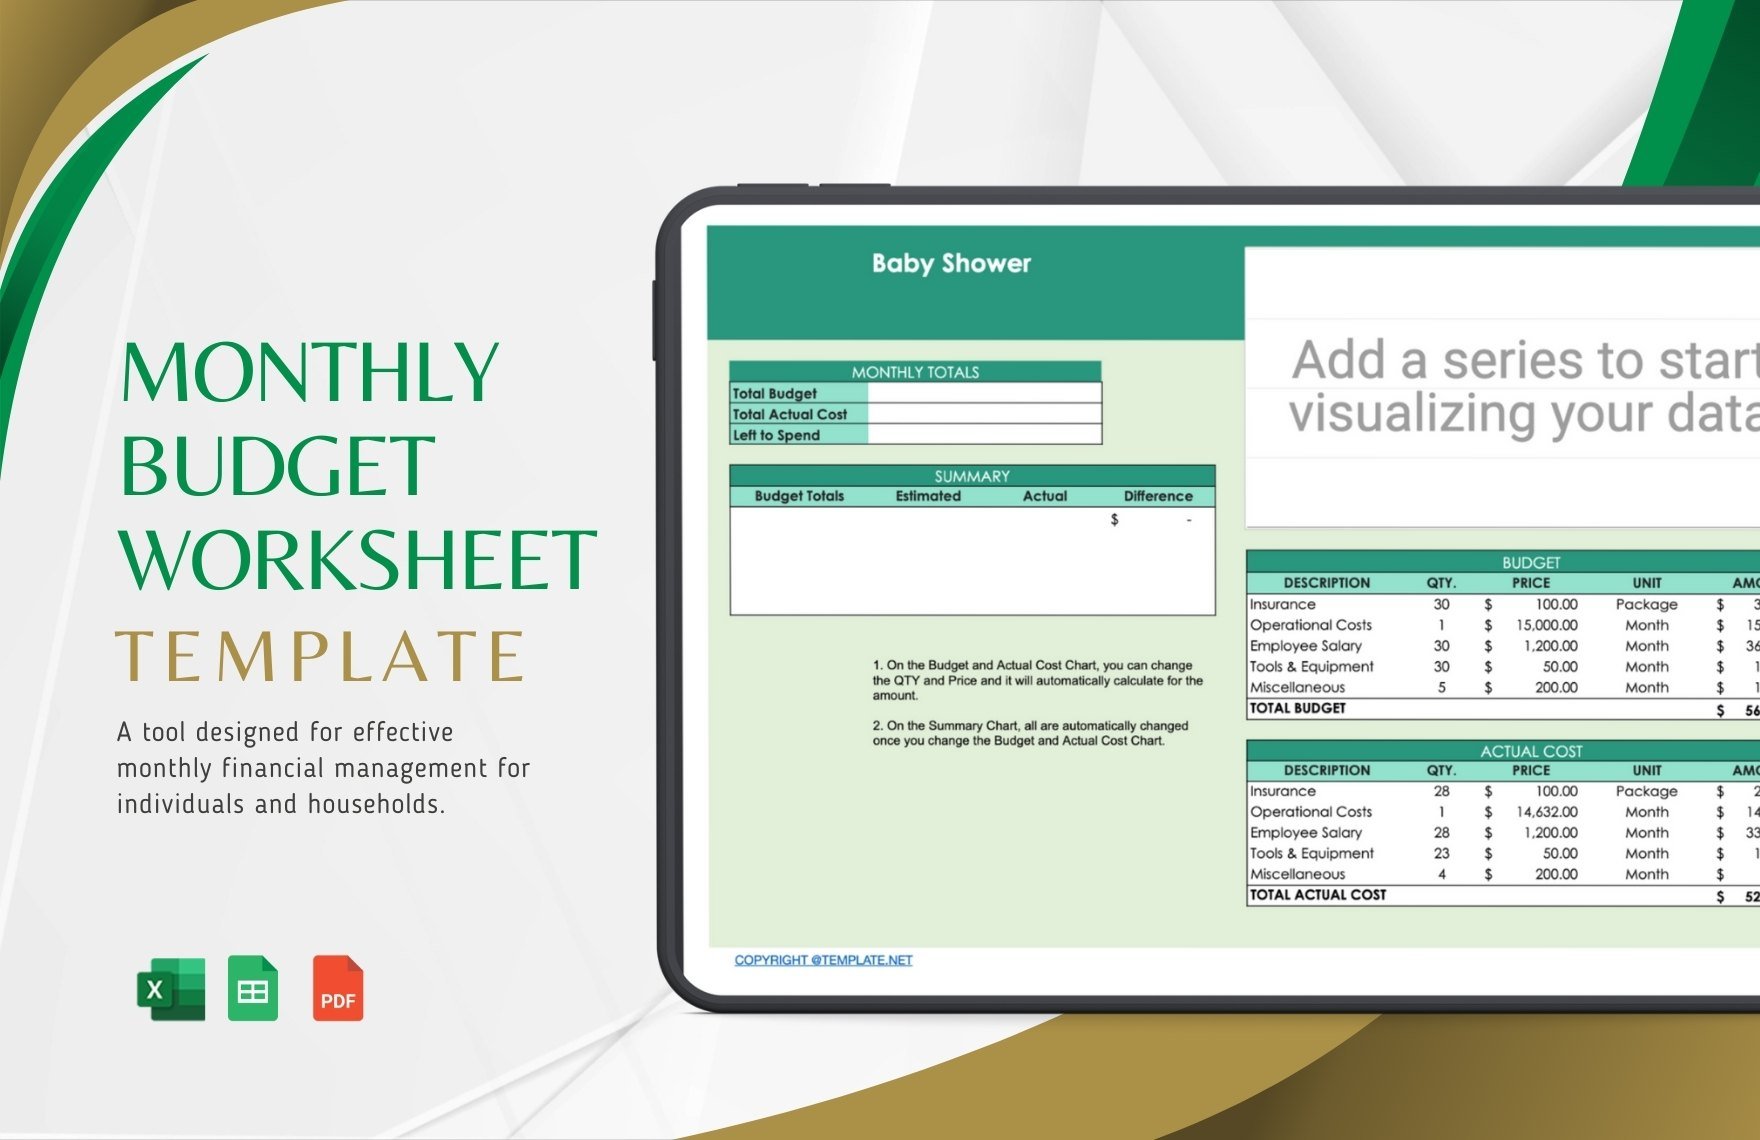 Monthly Budget Worksheet Template in Excel, PDF, Google Sheets